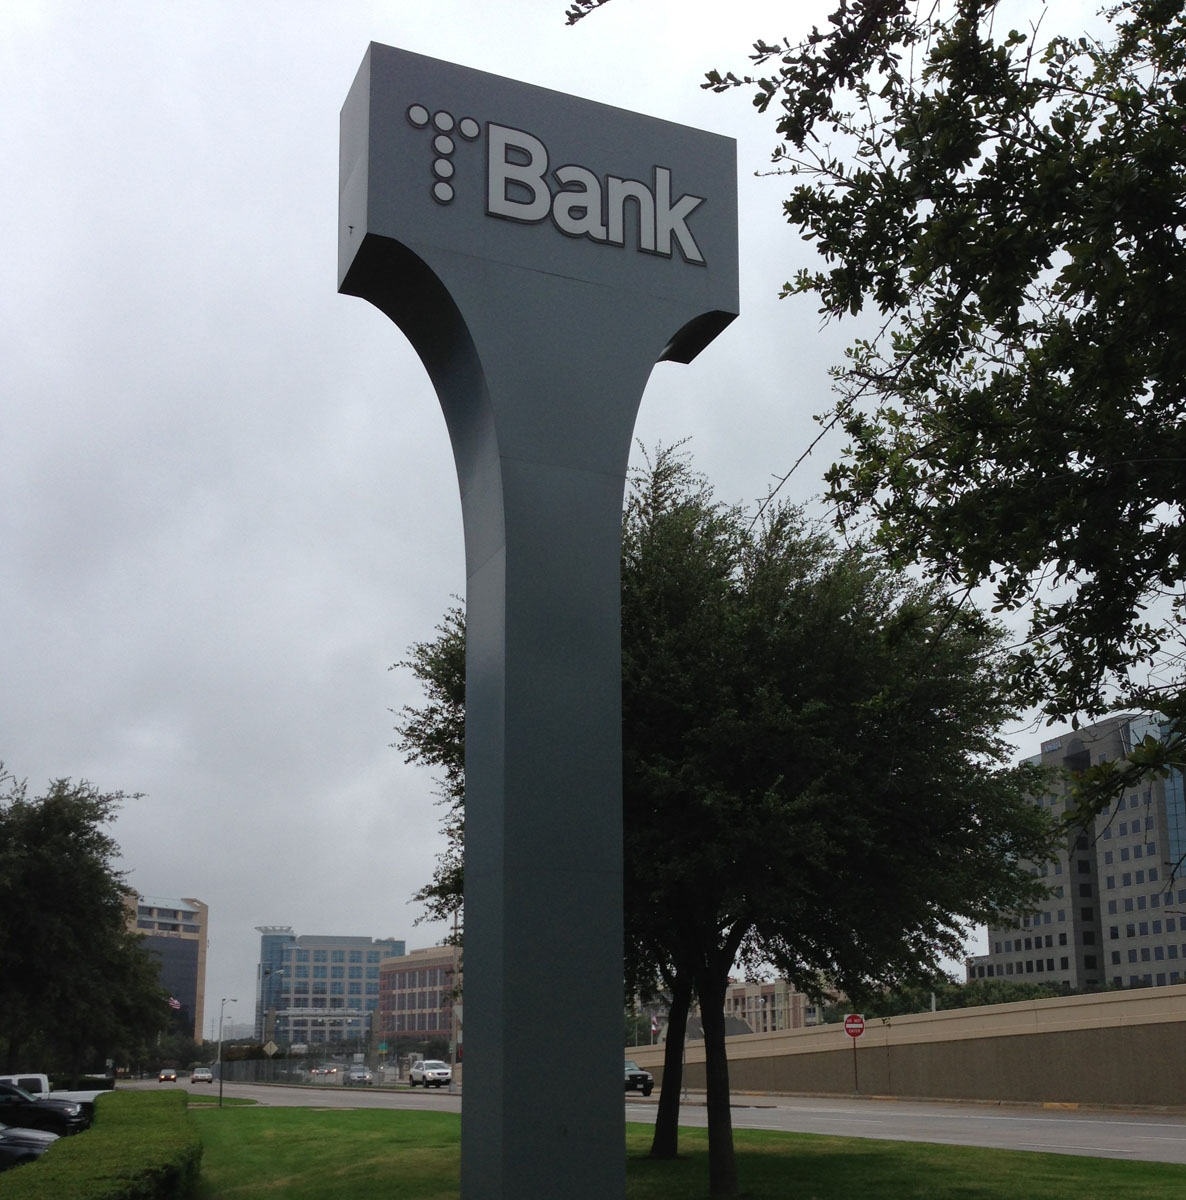 Pylon sign for T Bank installed by Priority Signs & Graphics in Dallas Fort Worth